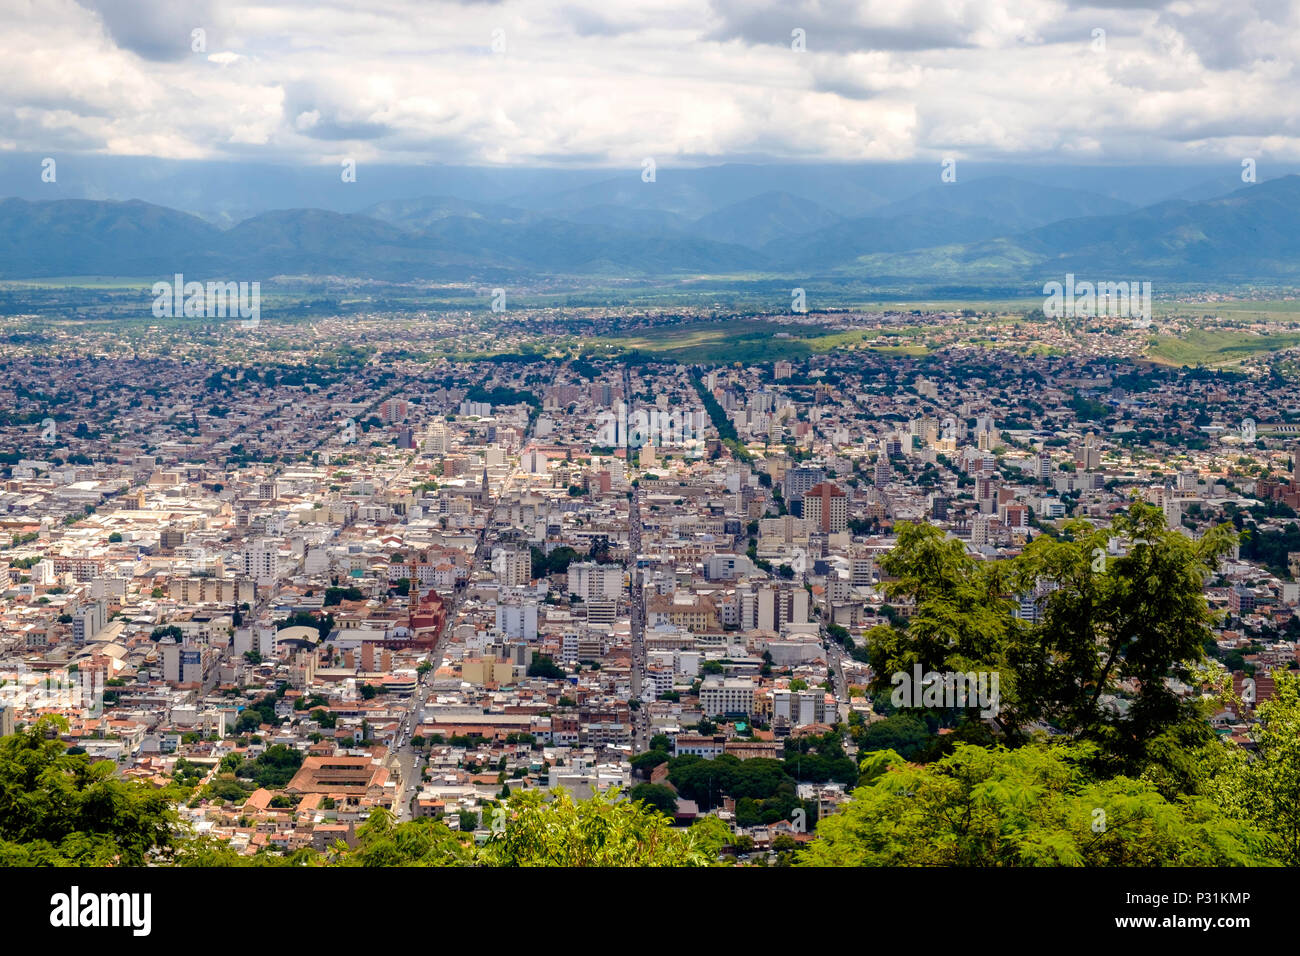 The viewpoint of Cerro San Bernardo shows the structure of Salta in Argentina. Along straight streets, buildings extend through the valley. Stock Photo